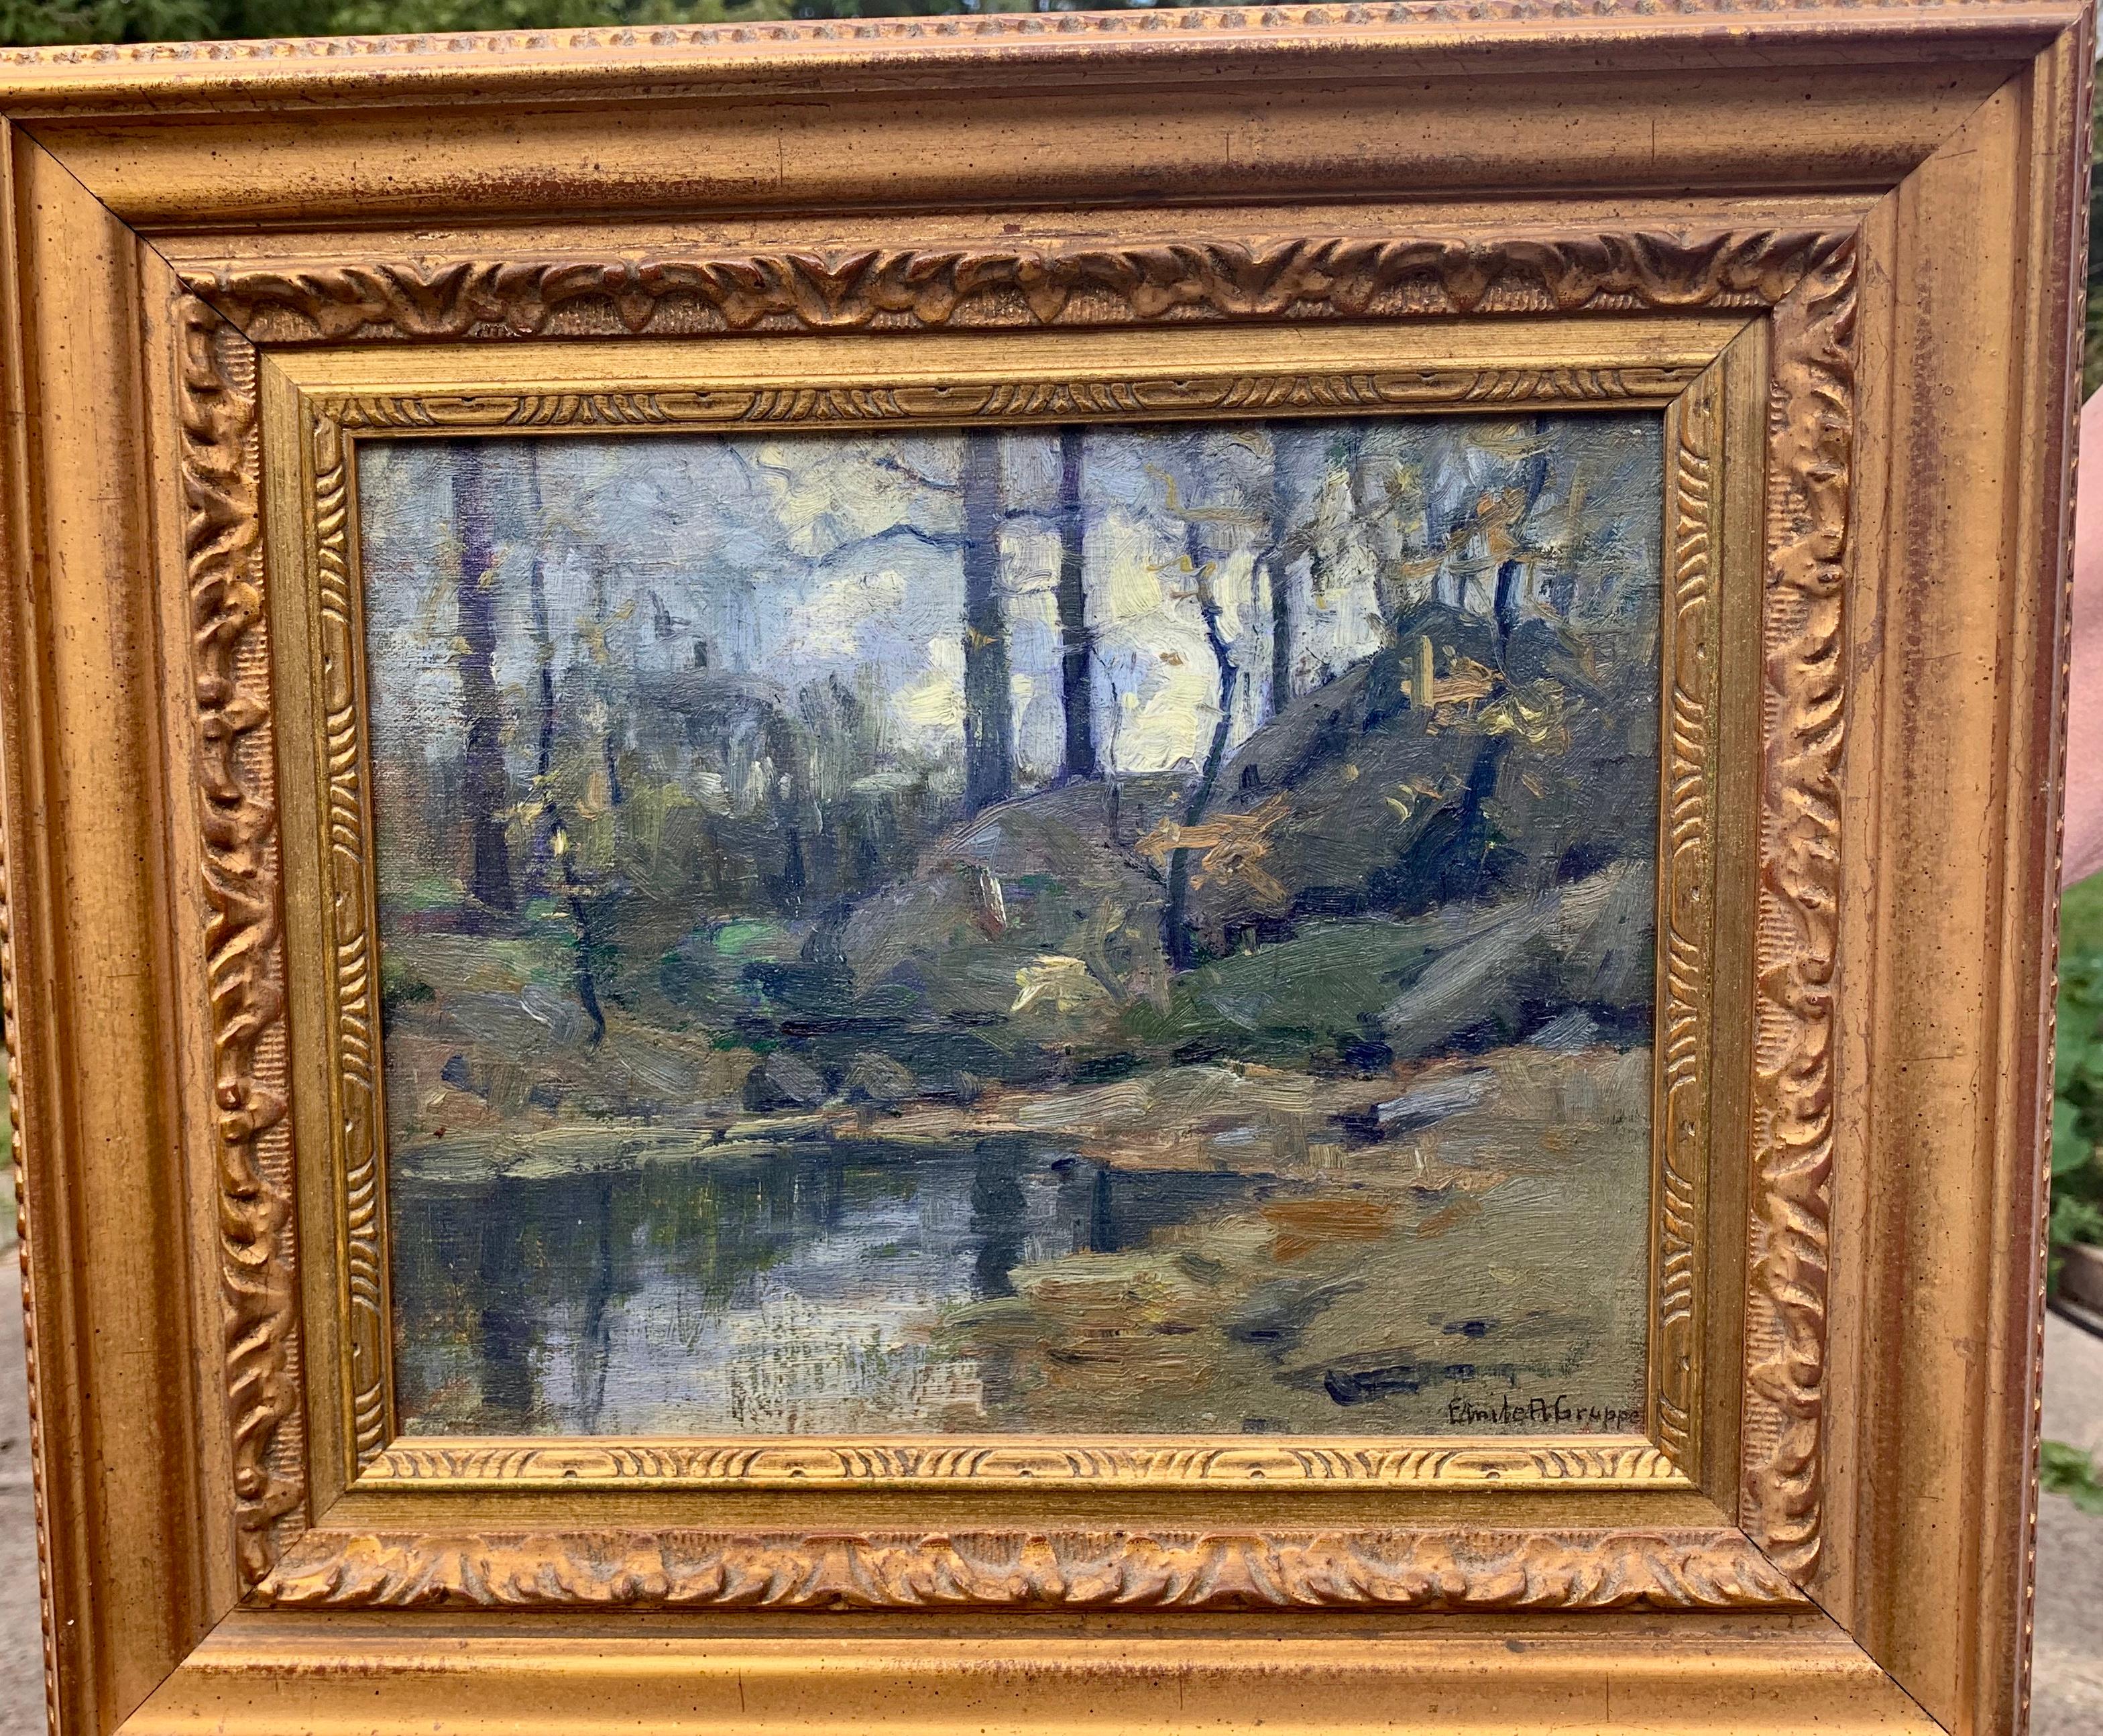 Emile Albert Gruppe Landscape Painting - "The Grey Day"